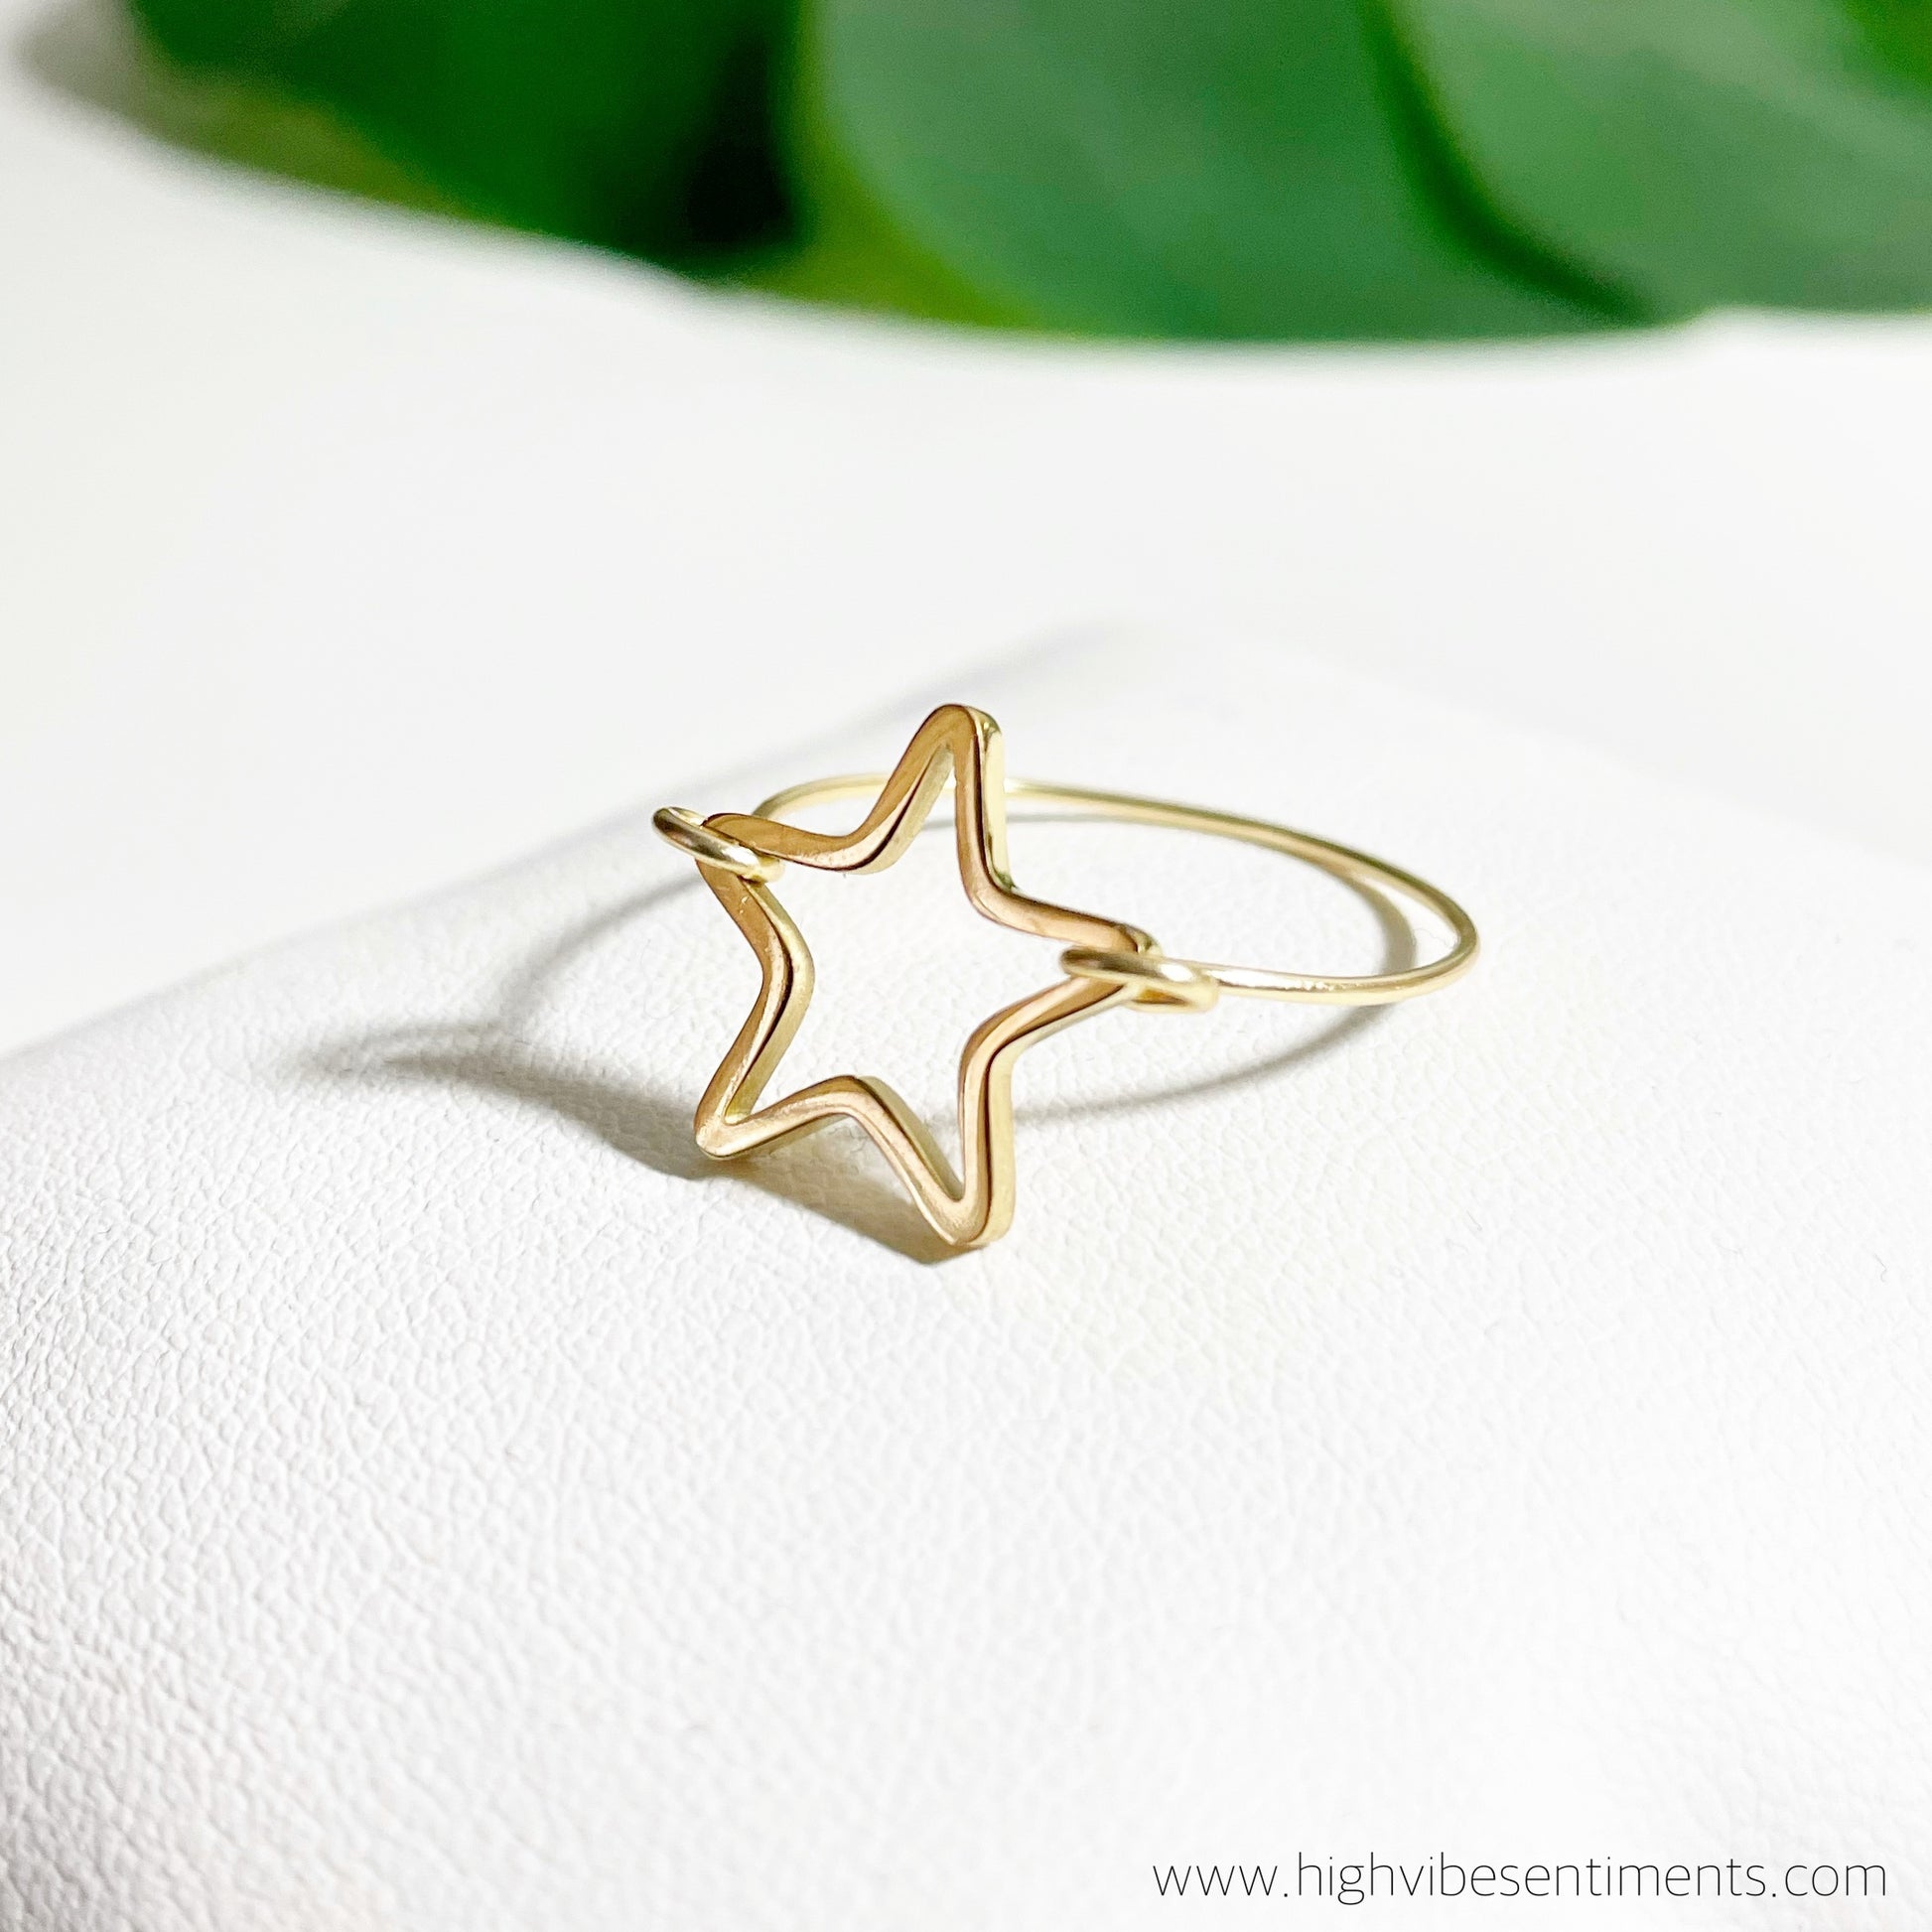 High Vibe Sentiments Stardust Ring